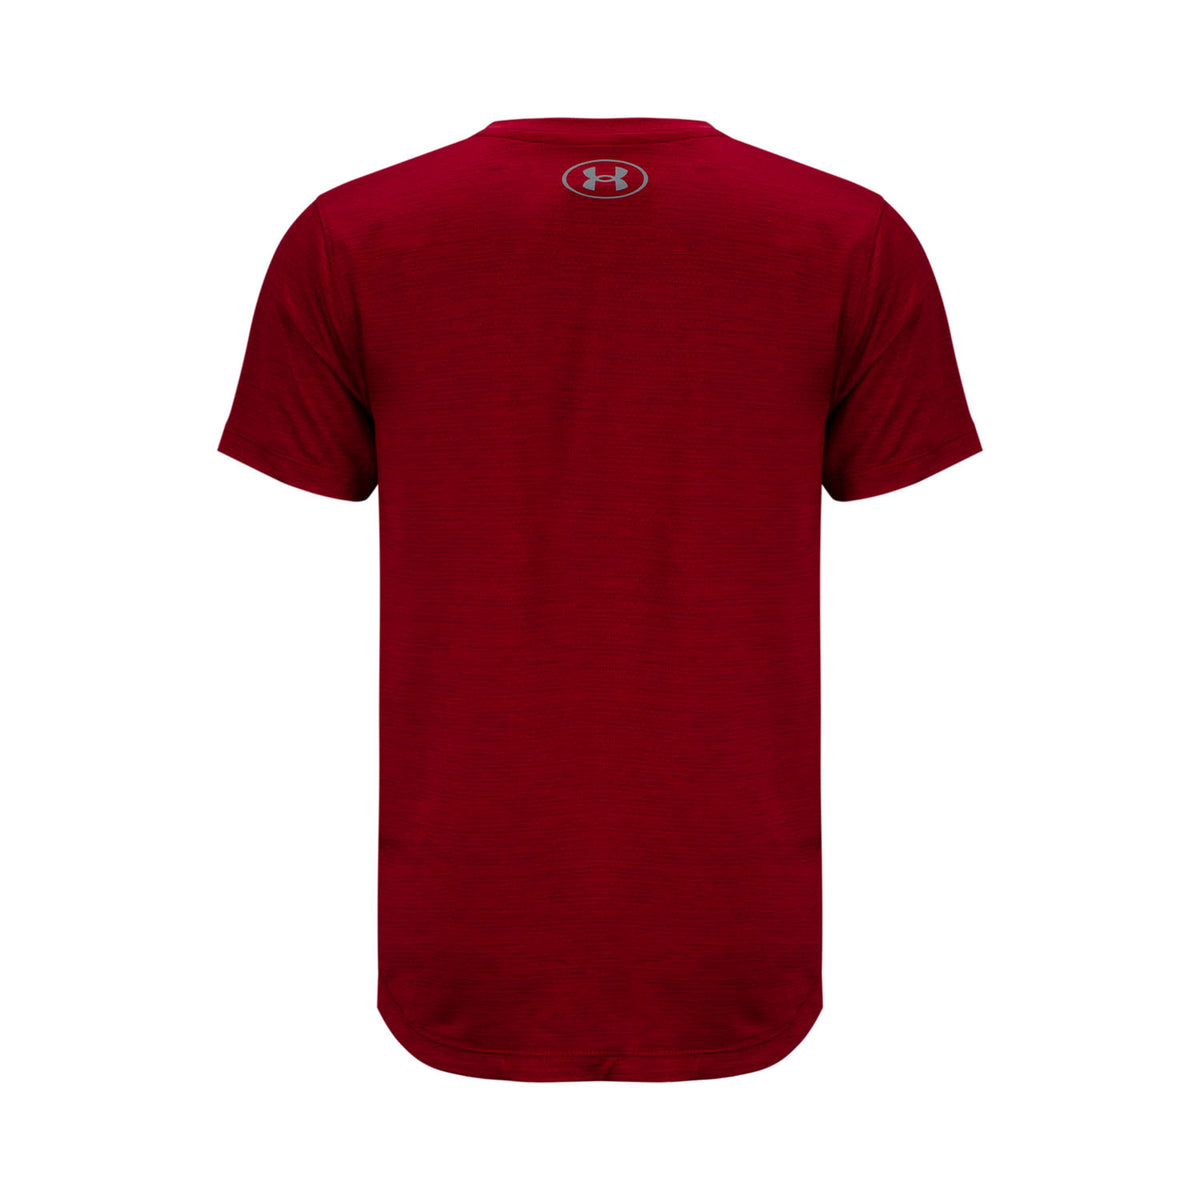 Boys Youth Vent Tech Tee - Red- Back View